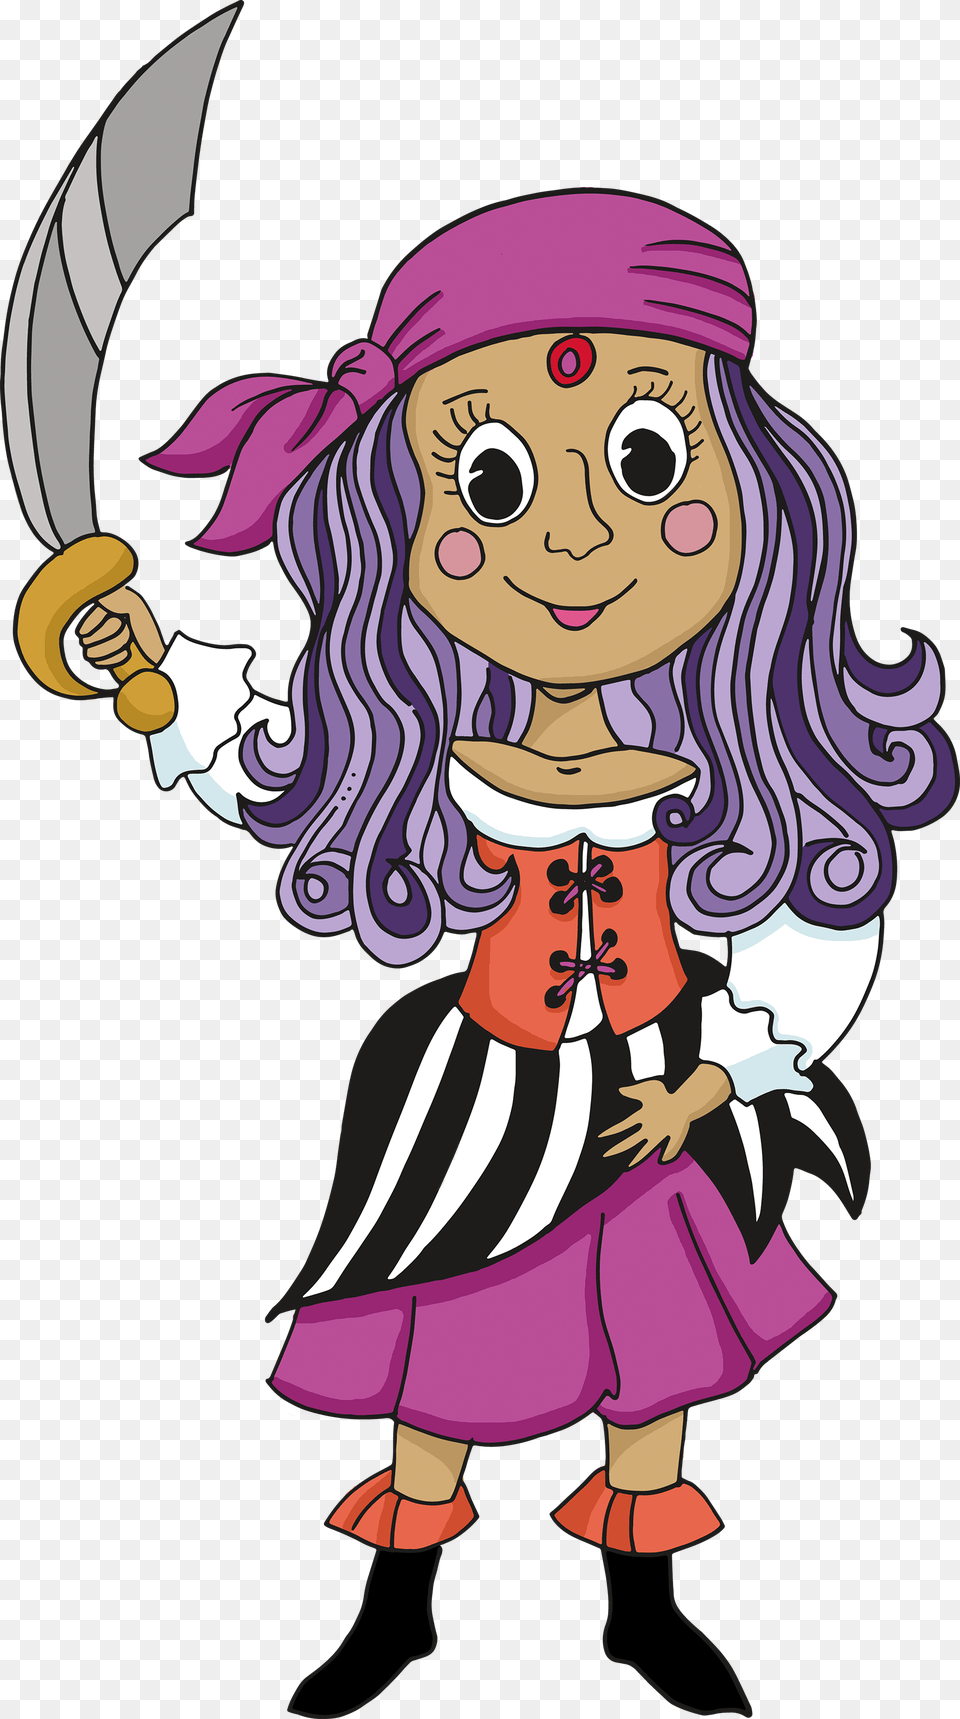 Download Pirate Free Transparent Image And Clipart Piracy, Book, Comics, Publication, Baby Png